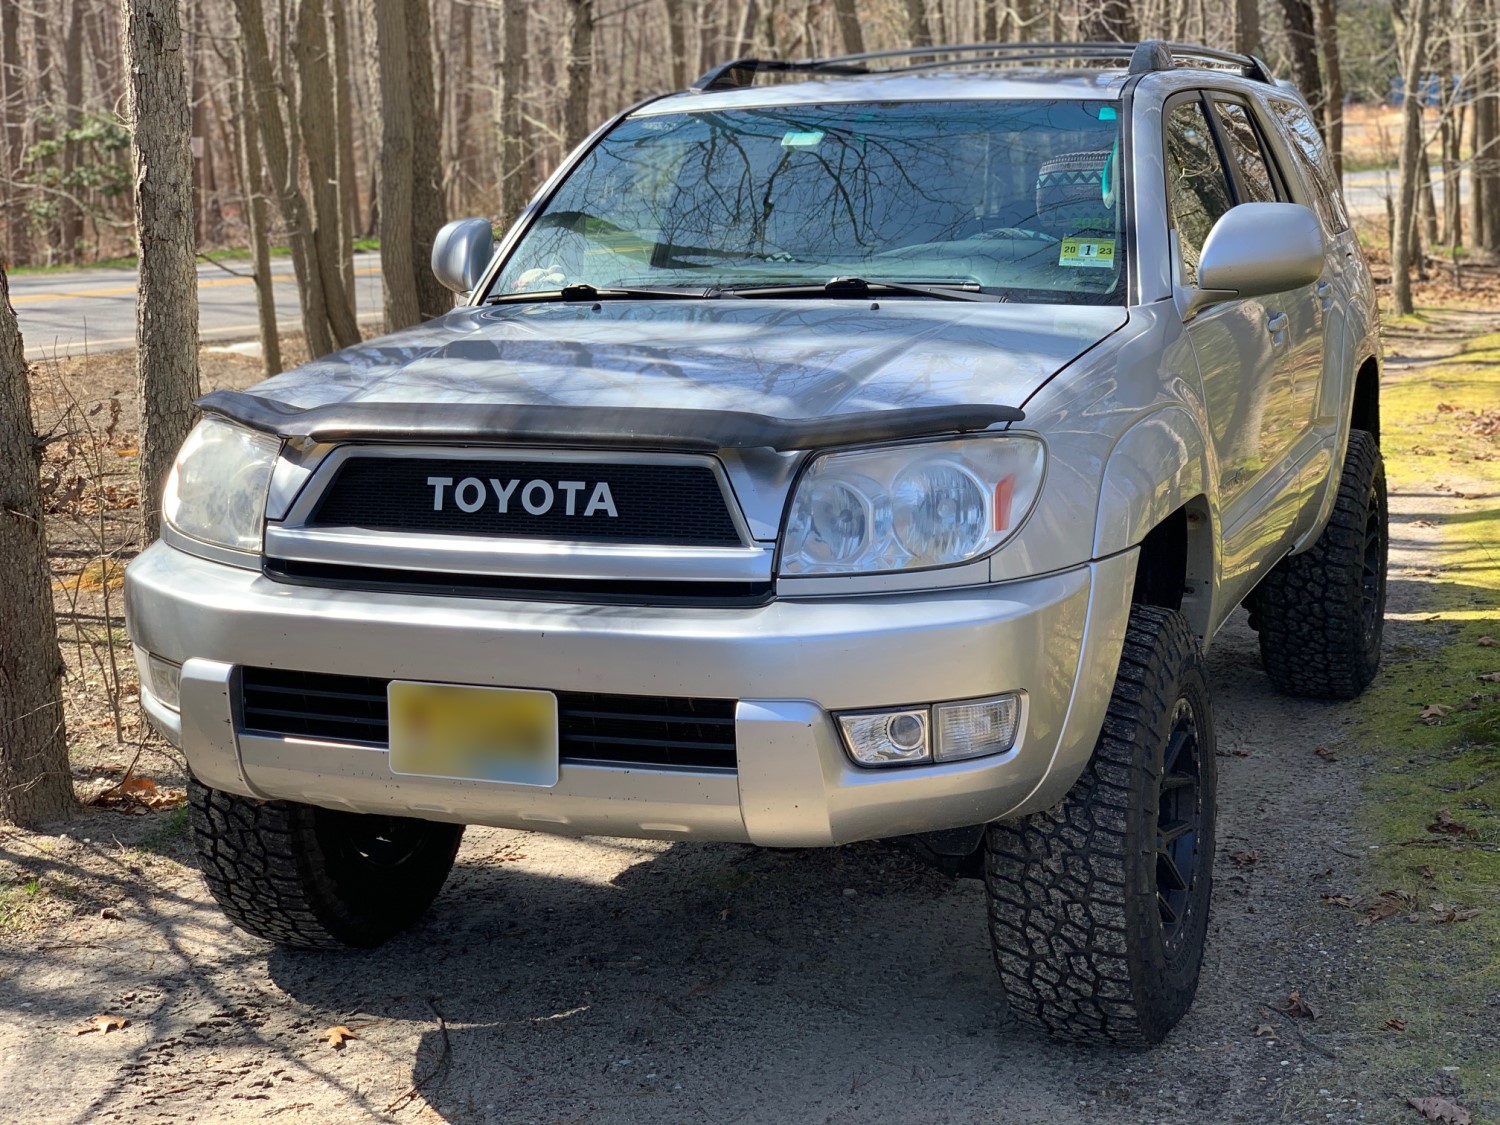 The Elusive 2003-2005 Toyota 4Runner Satoshi-Style Grille: A Rare Find